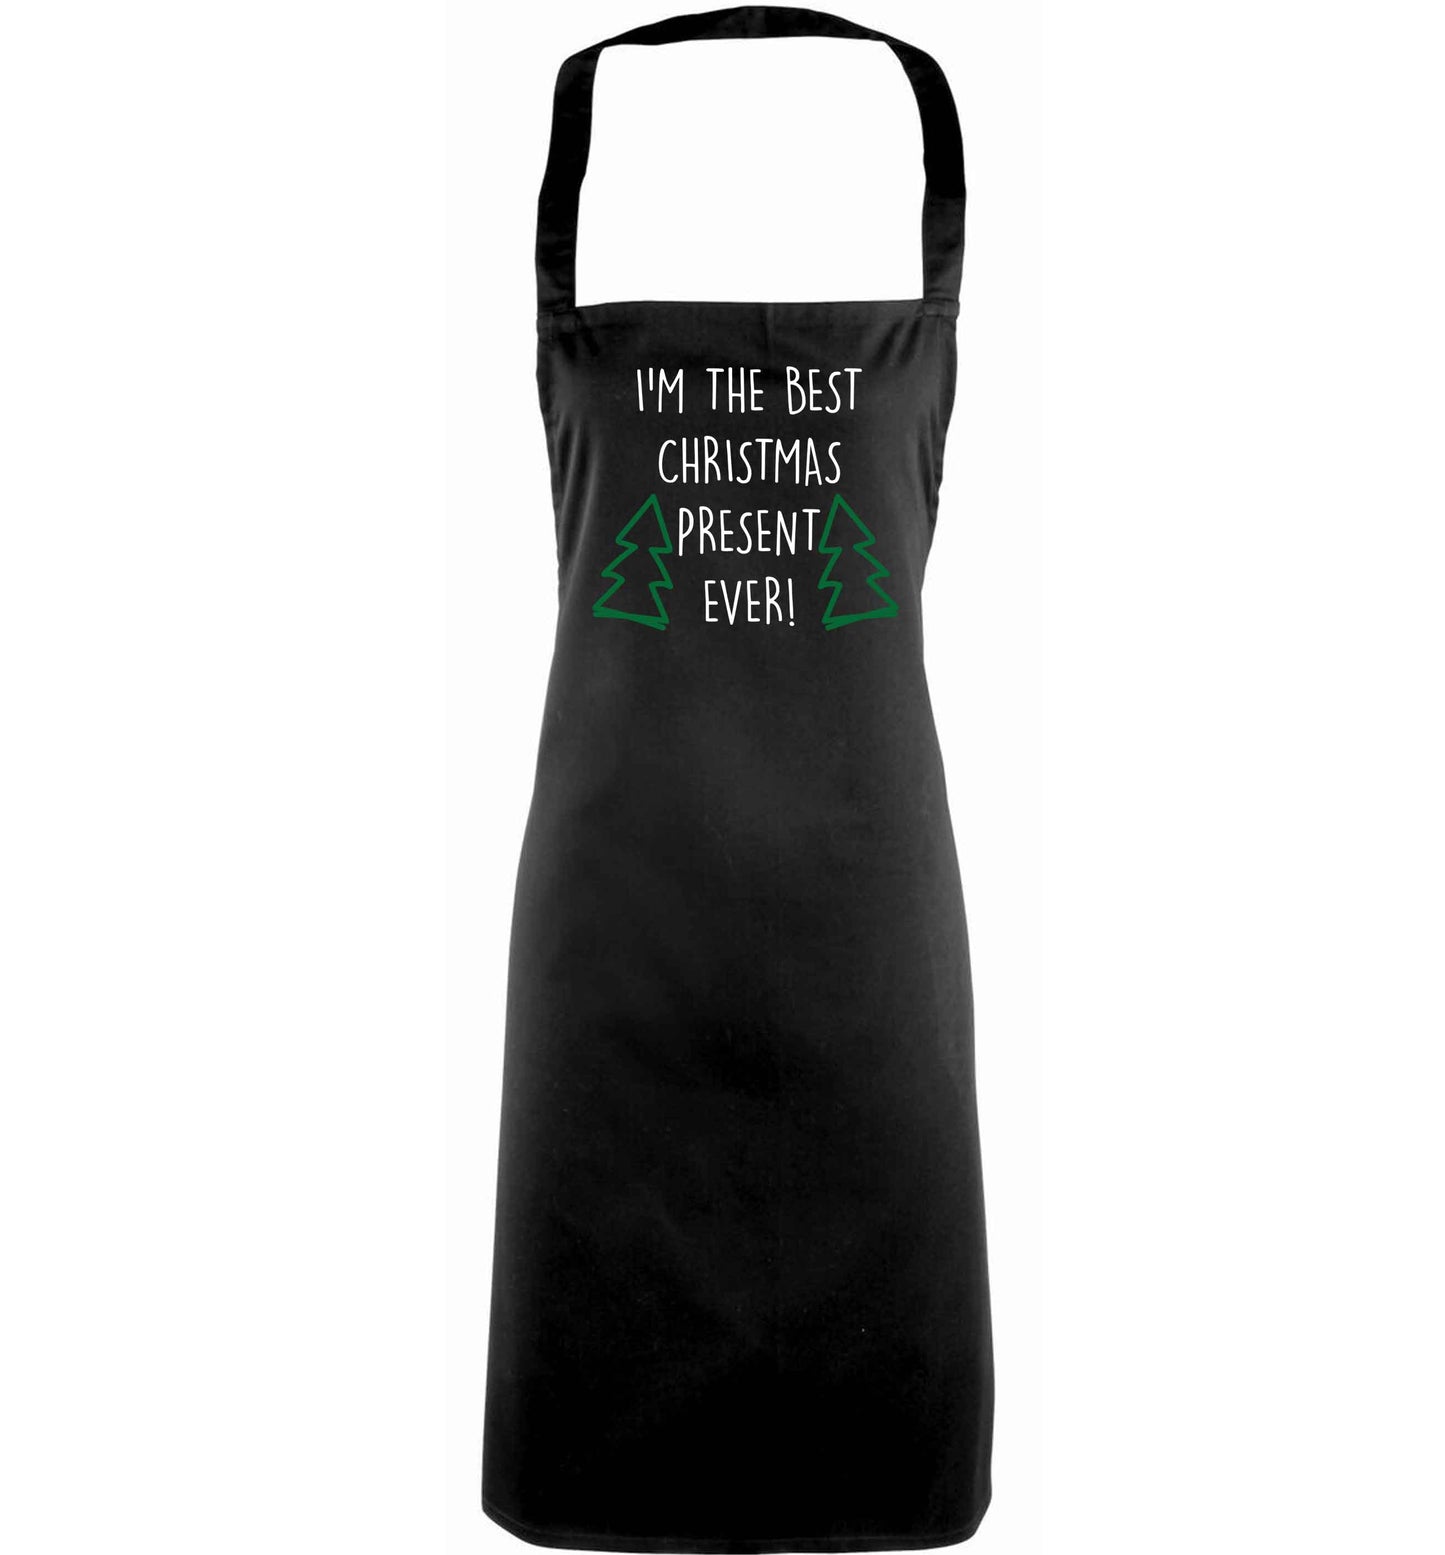 I'm the best Christmas present ever adults black apron